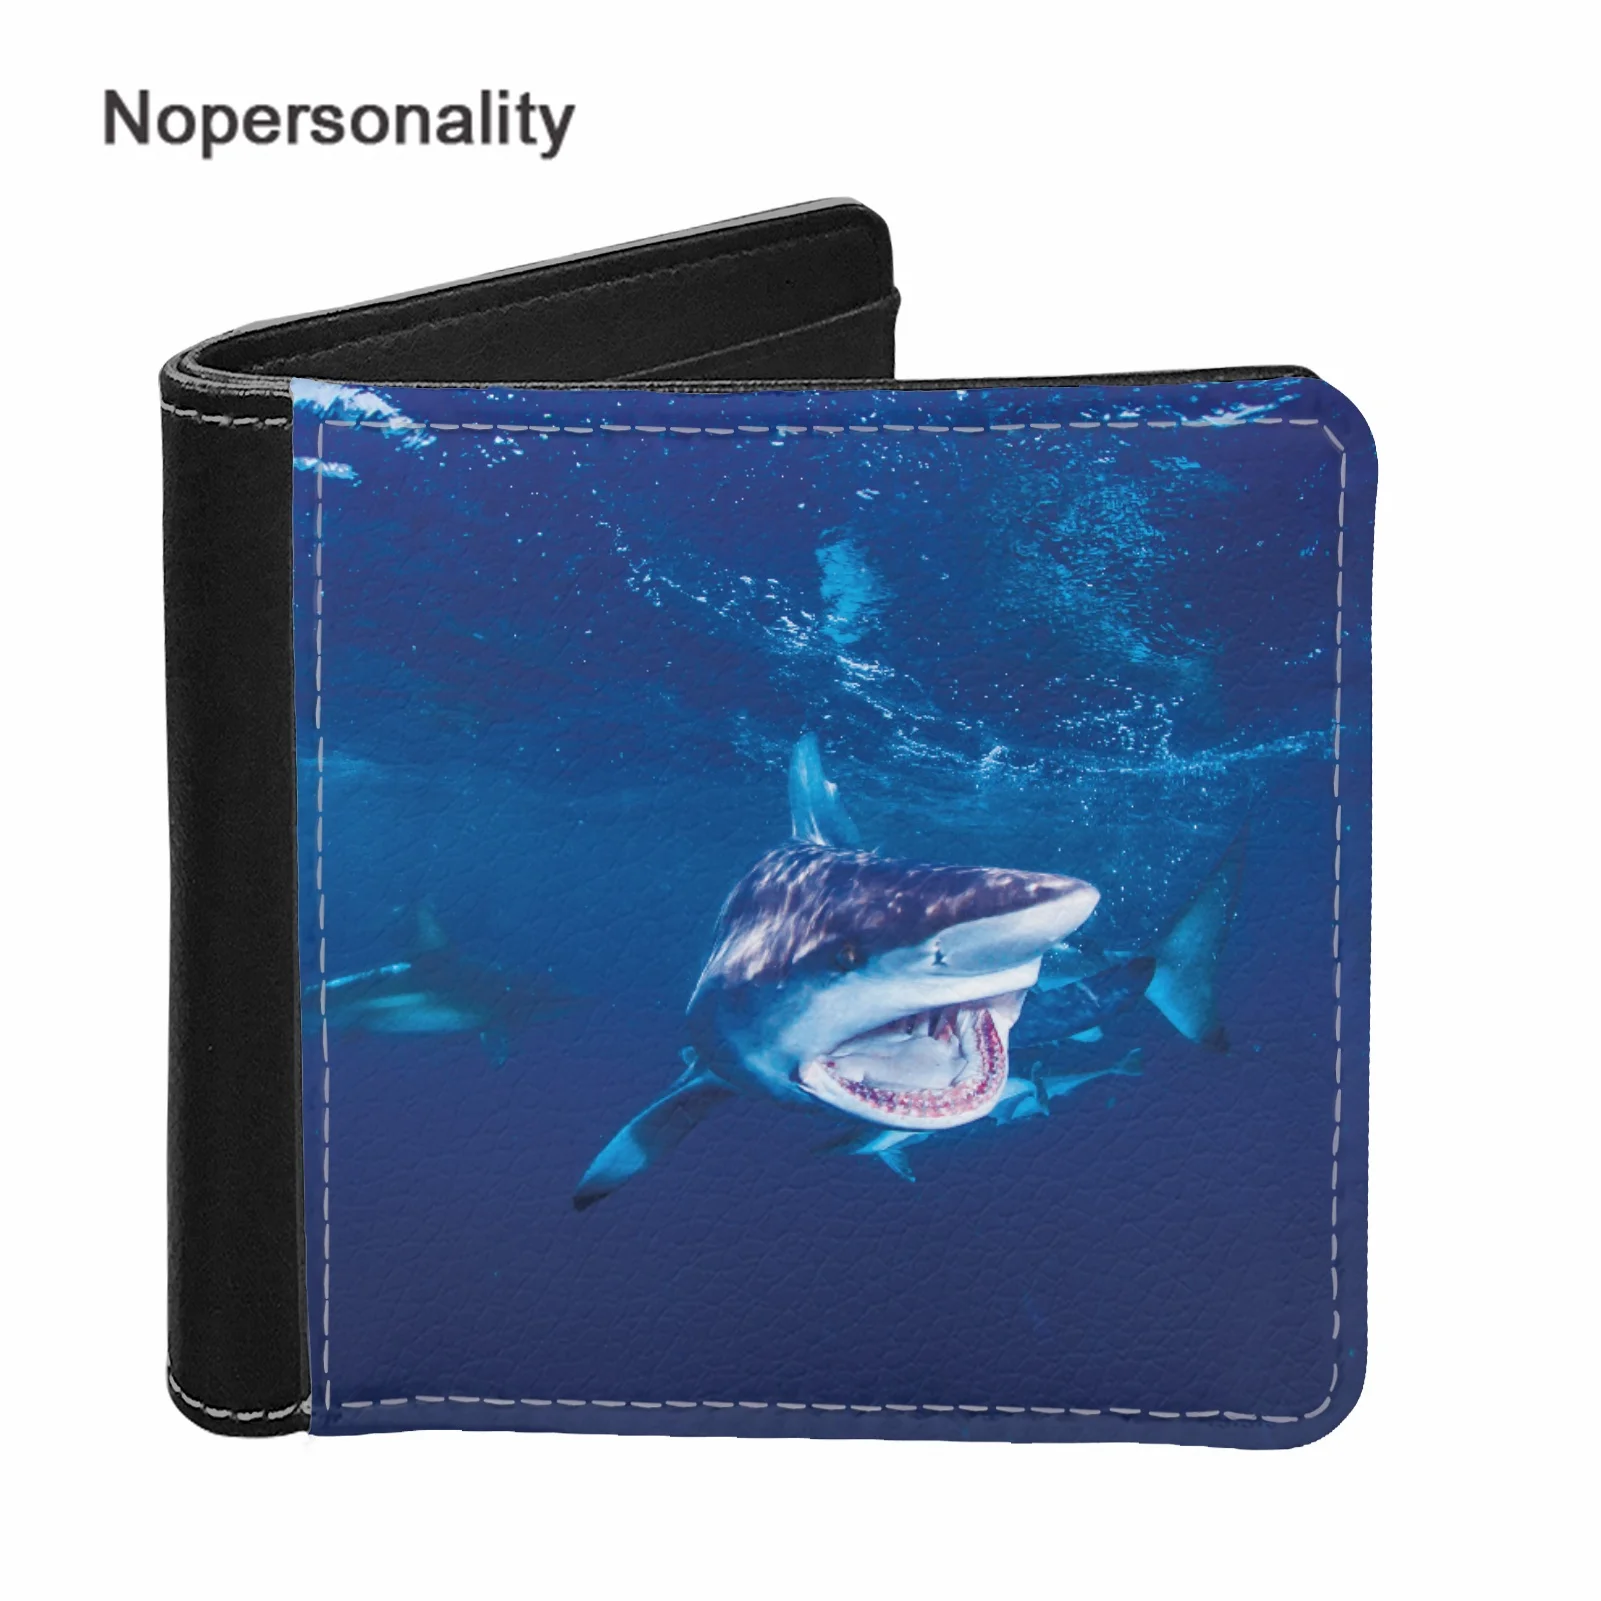 

Nopersonality Leather Men Wallets 3D Shark Print Foldable Card Holder Purse Small Money Bag Coins Purse DIY Gift for Dad